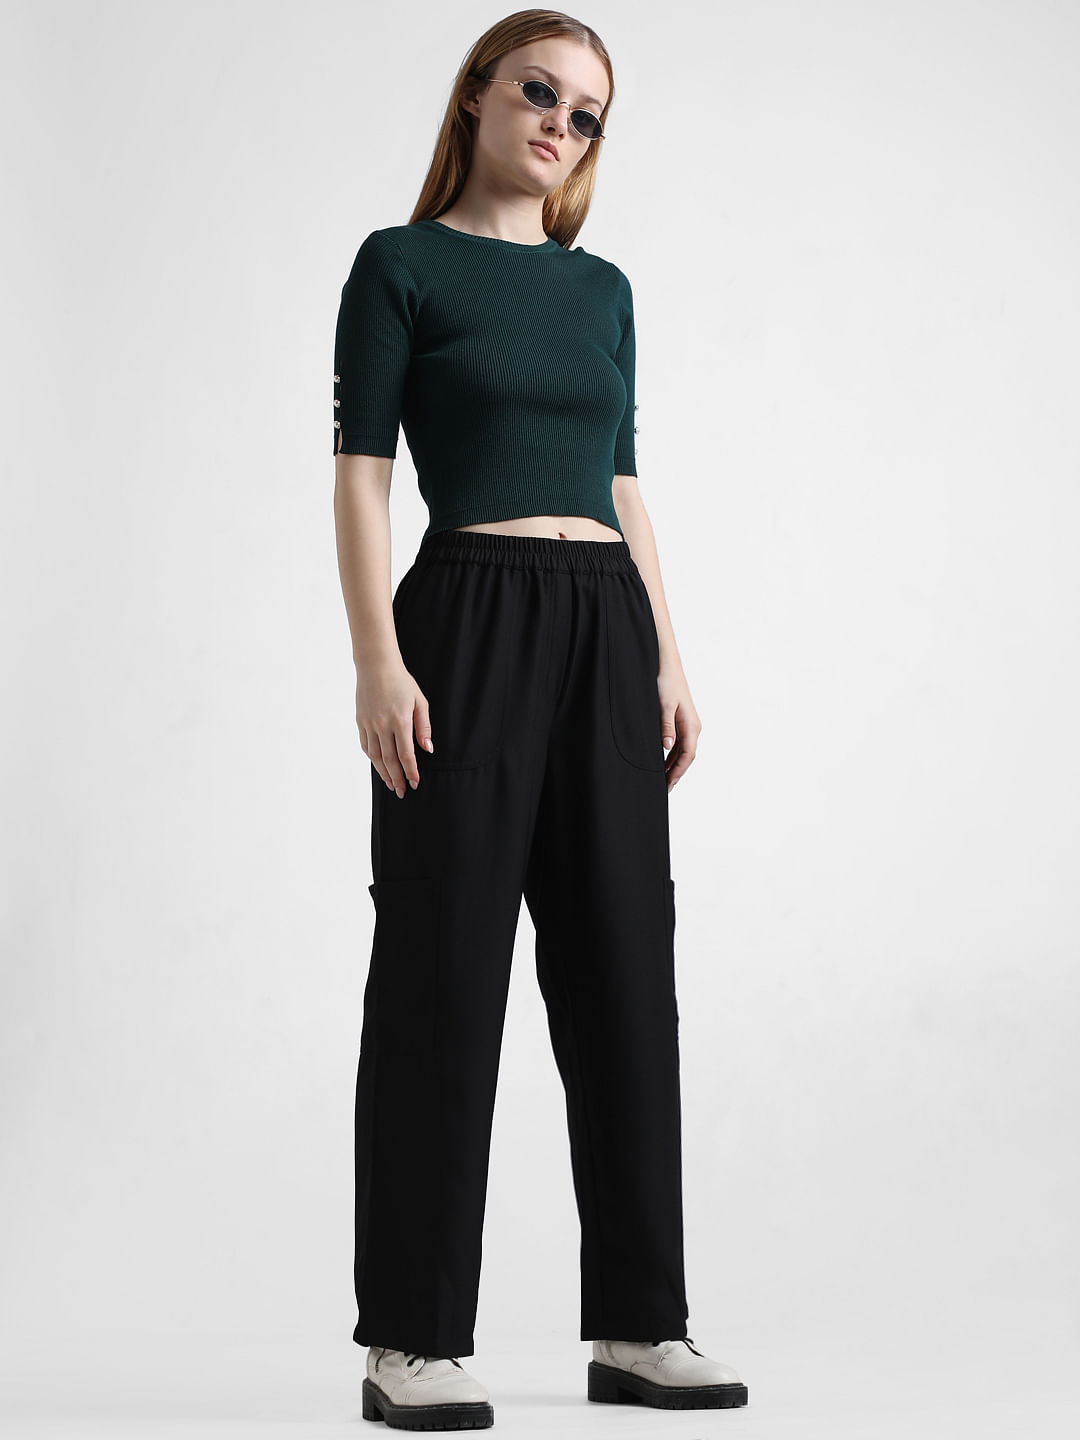 Buy Black Solid Parallel Pants With Embroidery Online - W for Woman